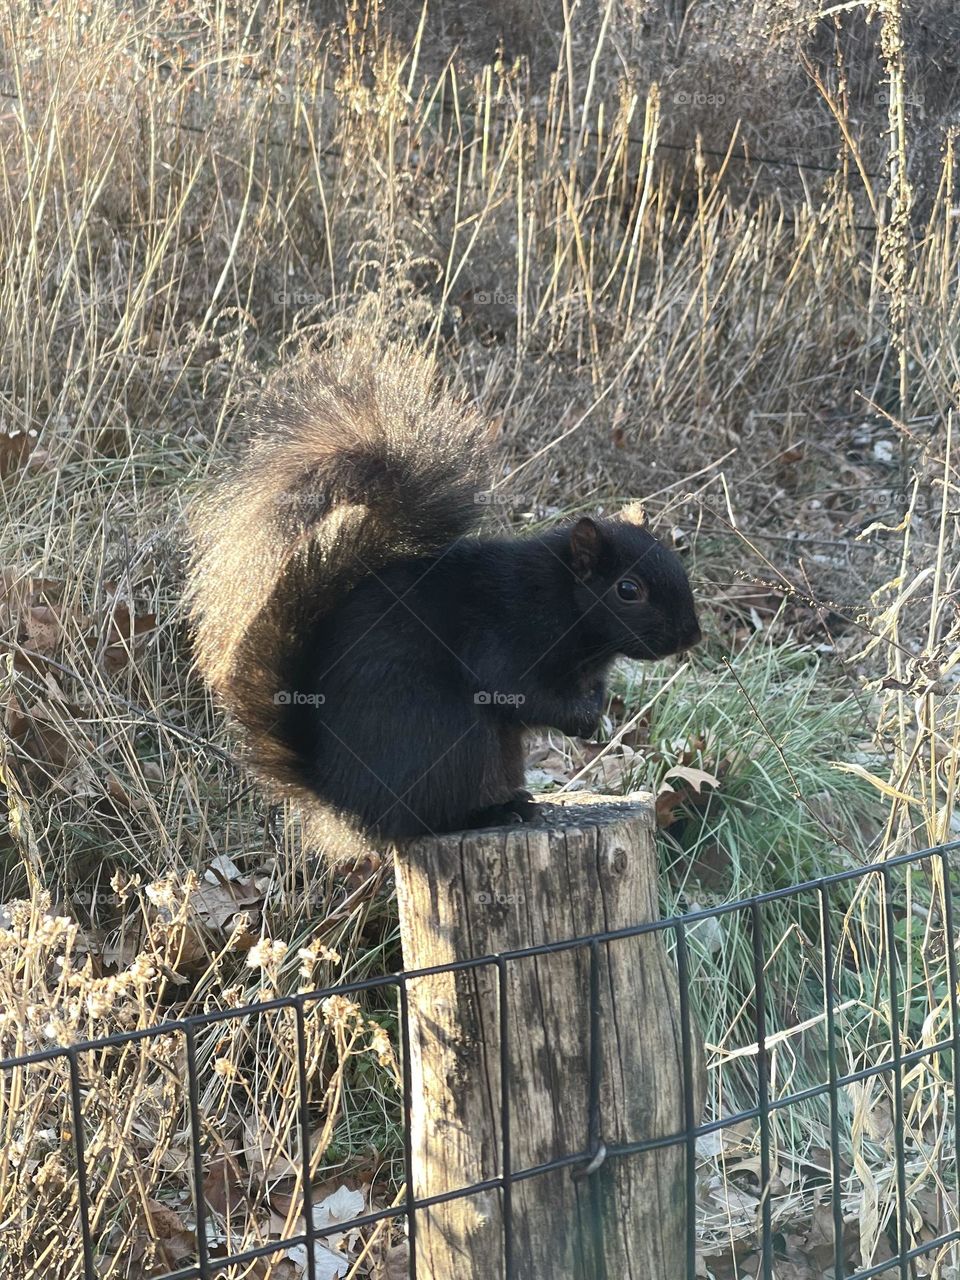 Black squirrel eating and posing for photo. New York Central Park in winter.